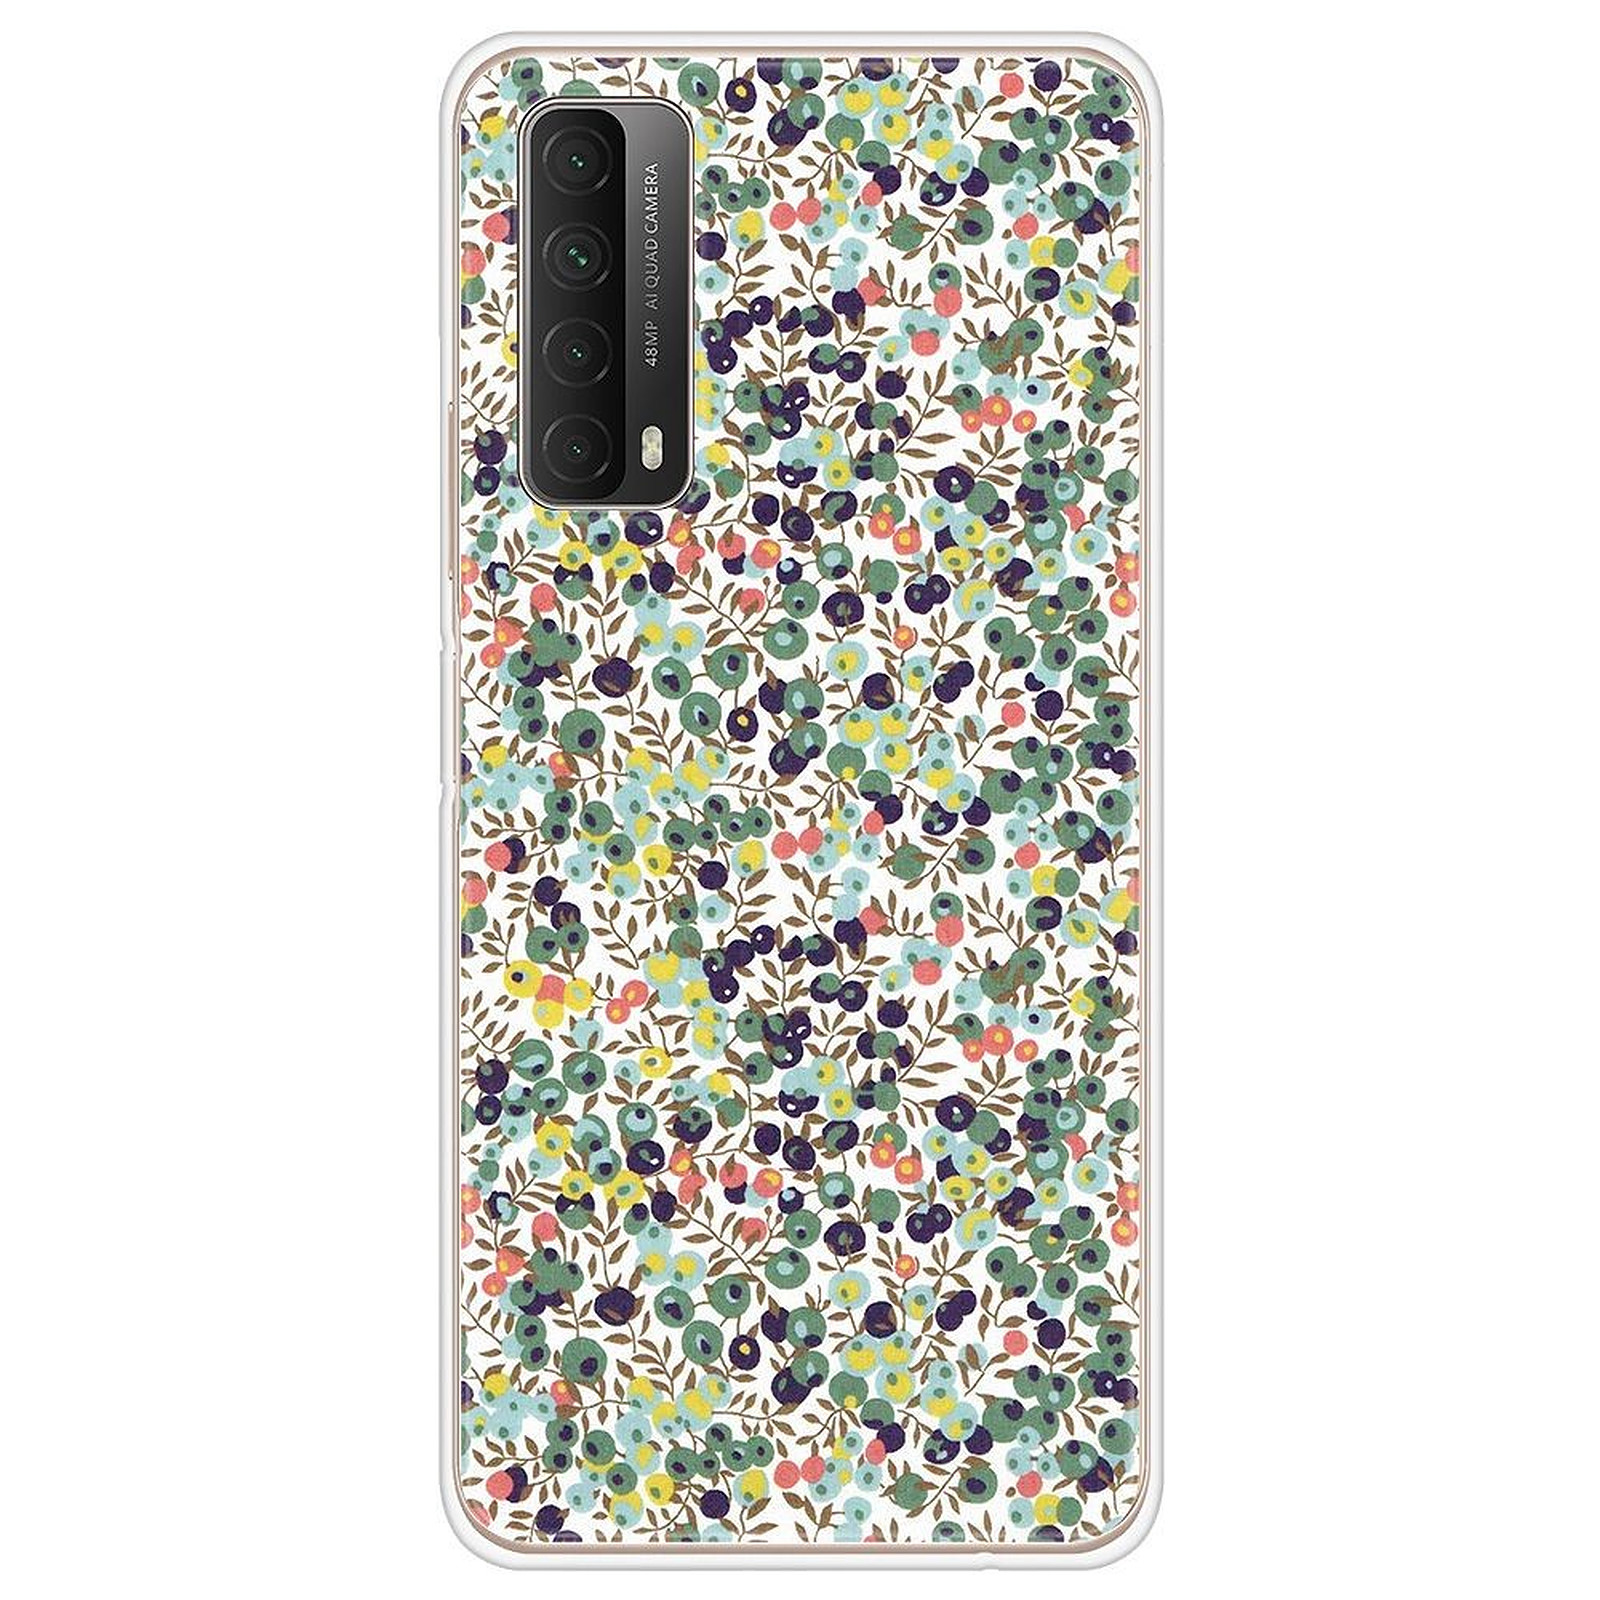 1001 Coques Coque silicone gel Huawei P Smart 2021 motif Liberty Wiltshire Vert - Coque telephone 1001Coques